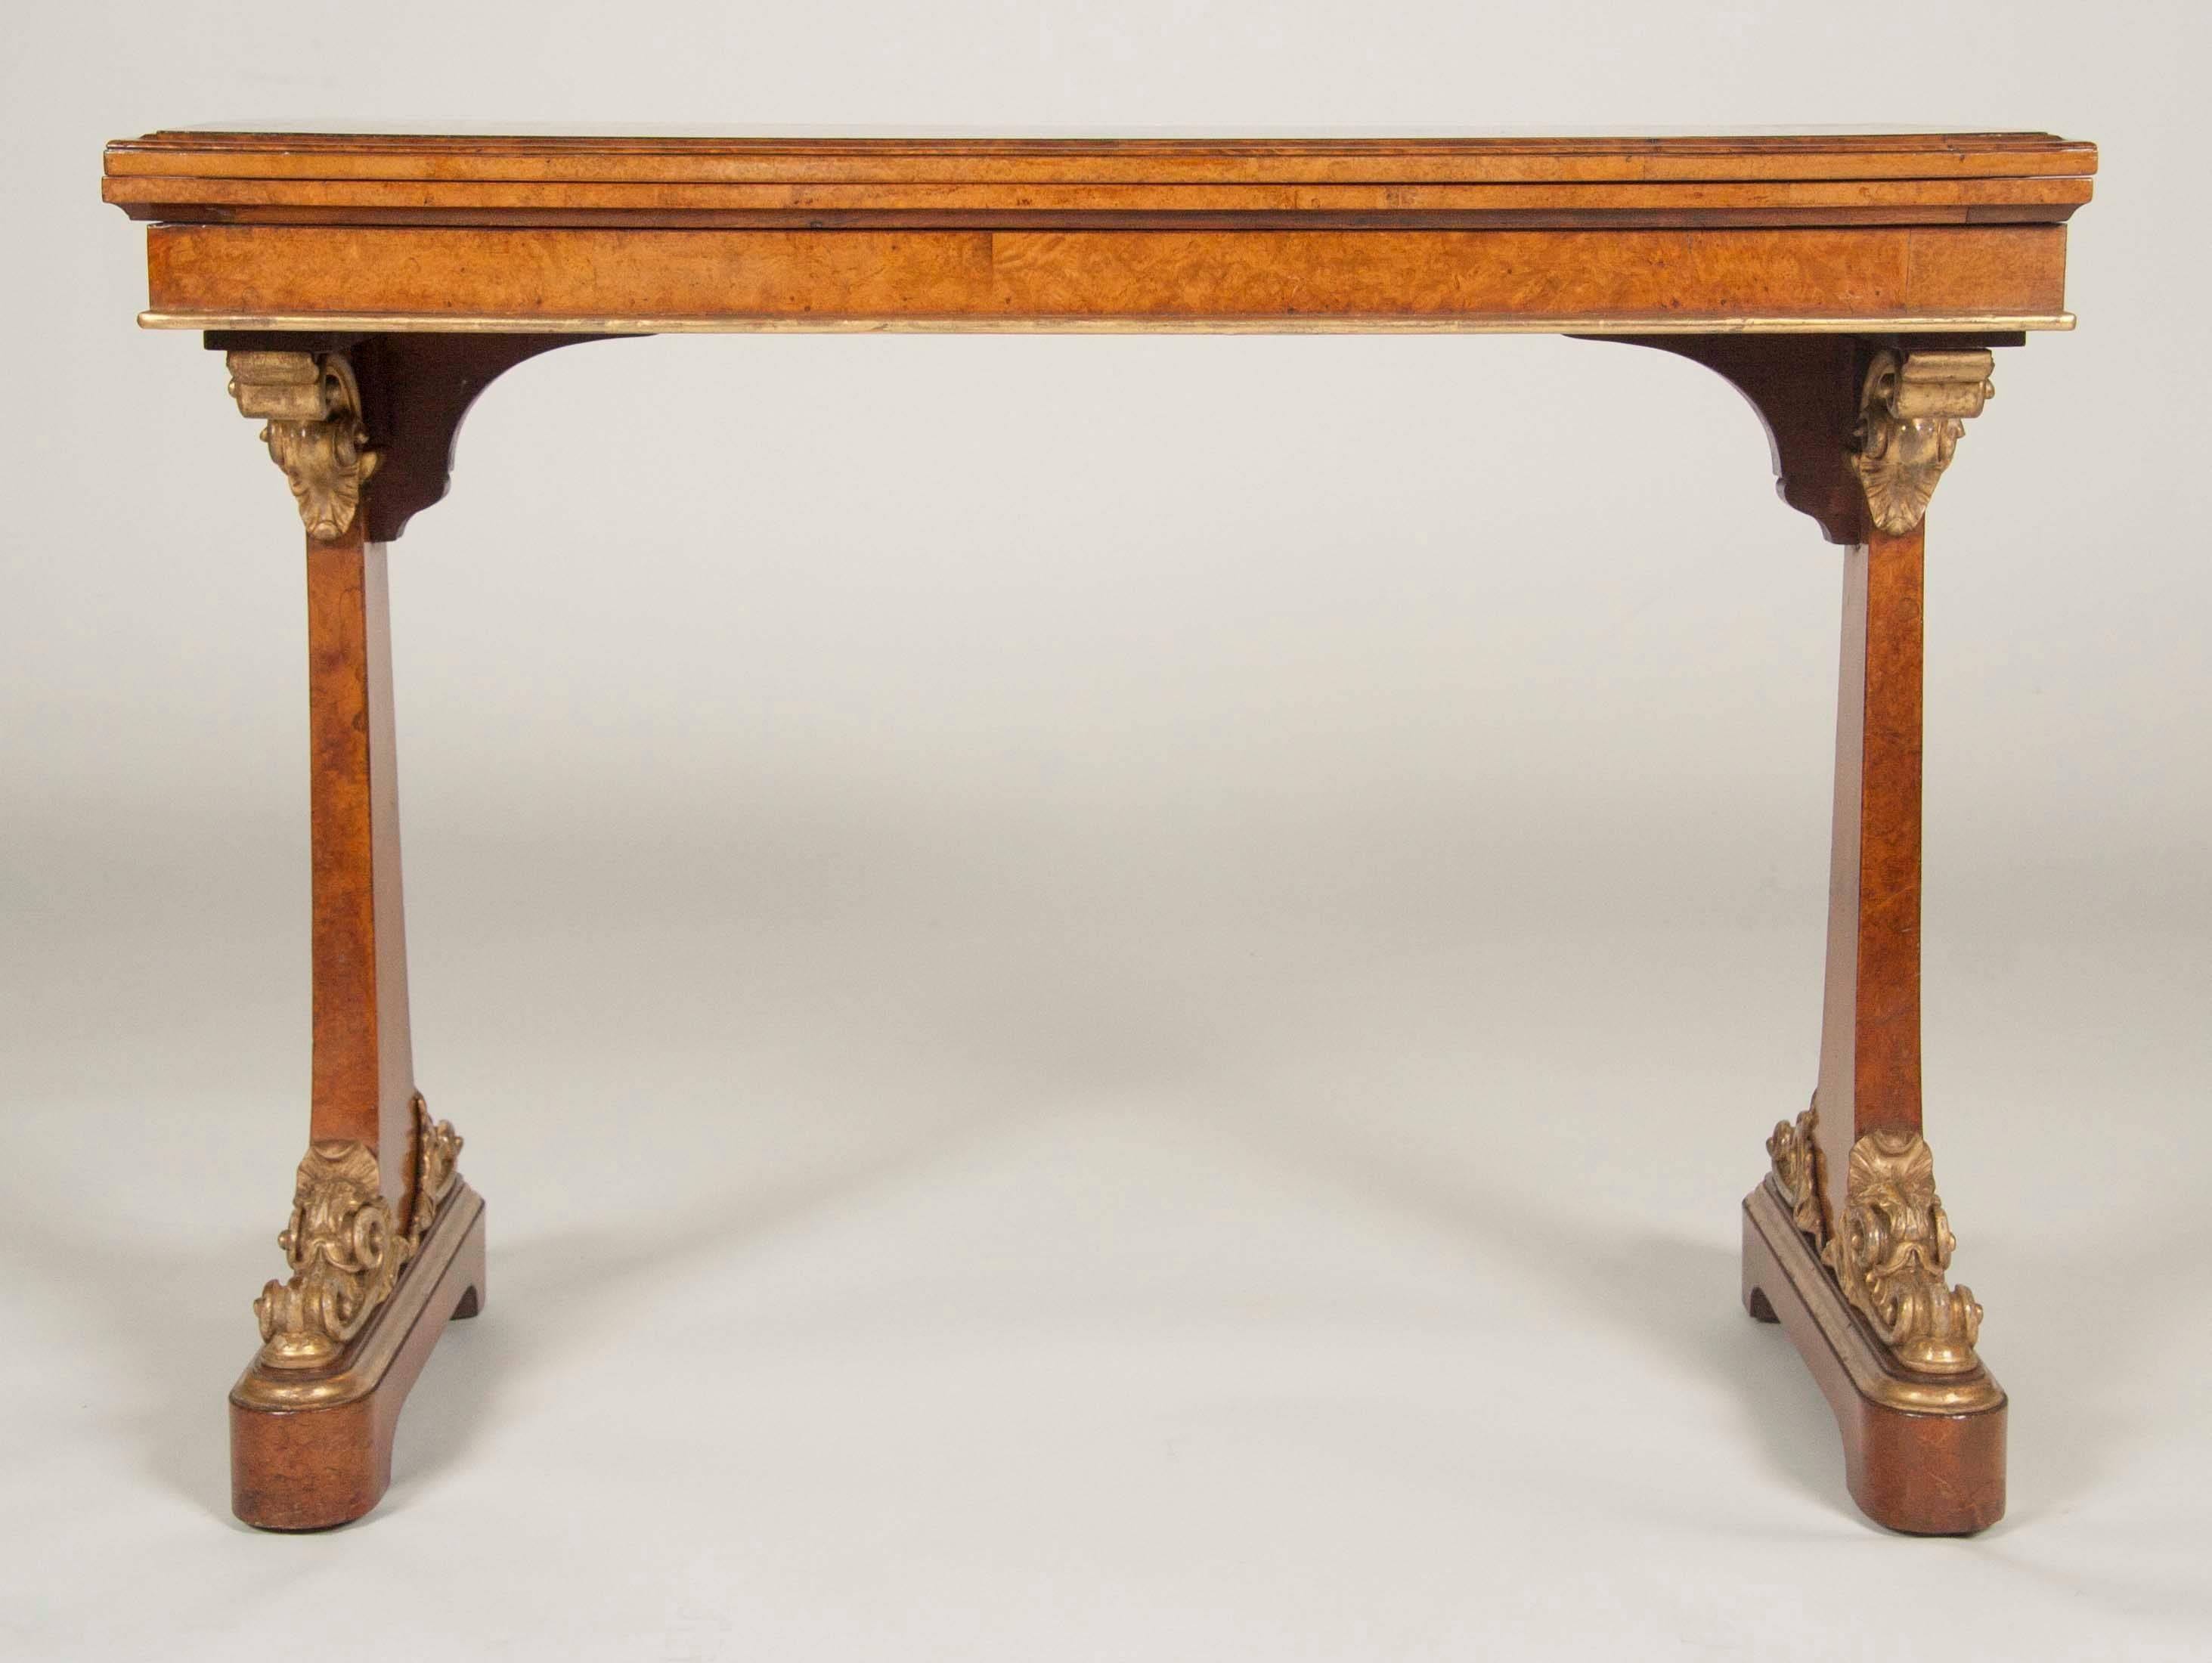 A late Regency burl wood and giltwood games table produced by T.G Seddon (cabinet maker for the queen).